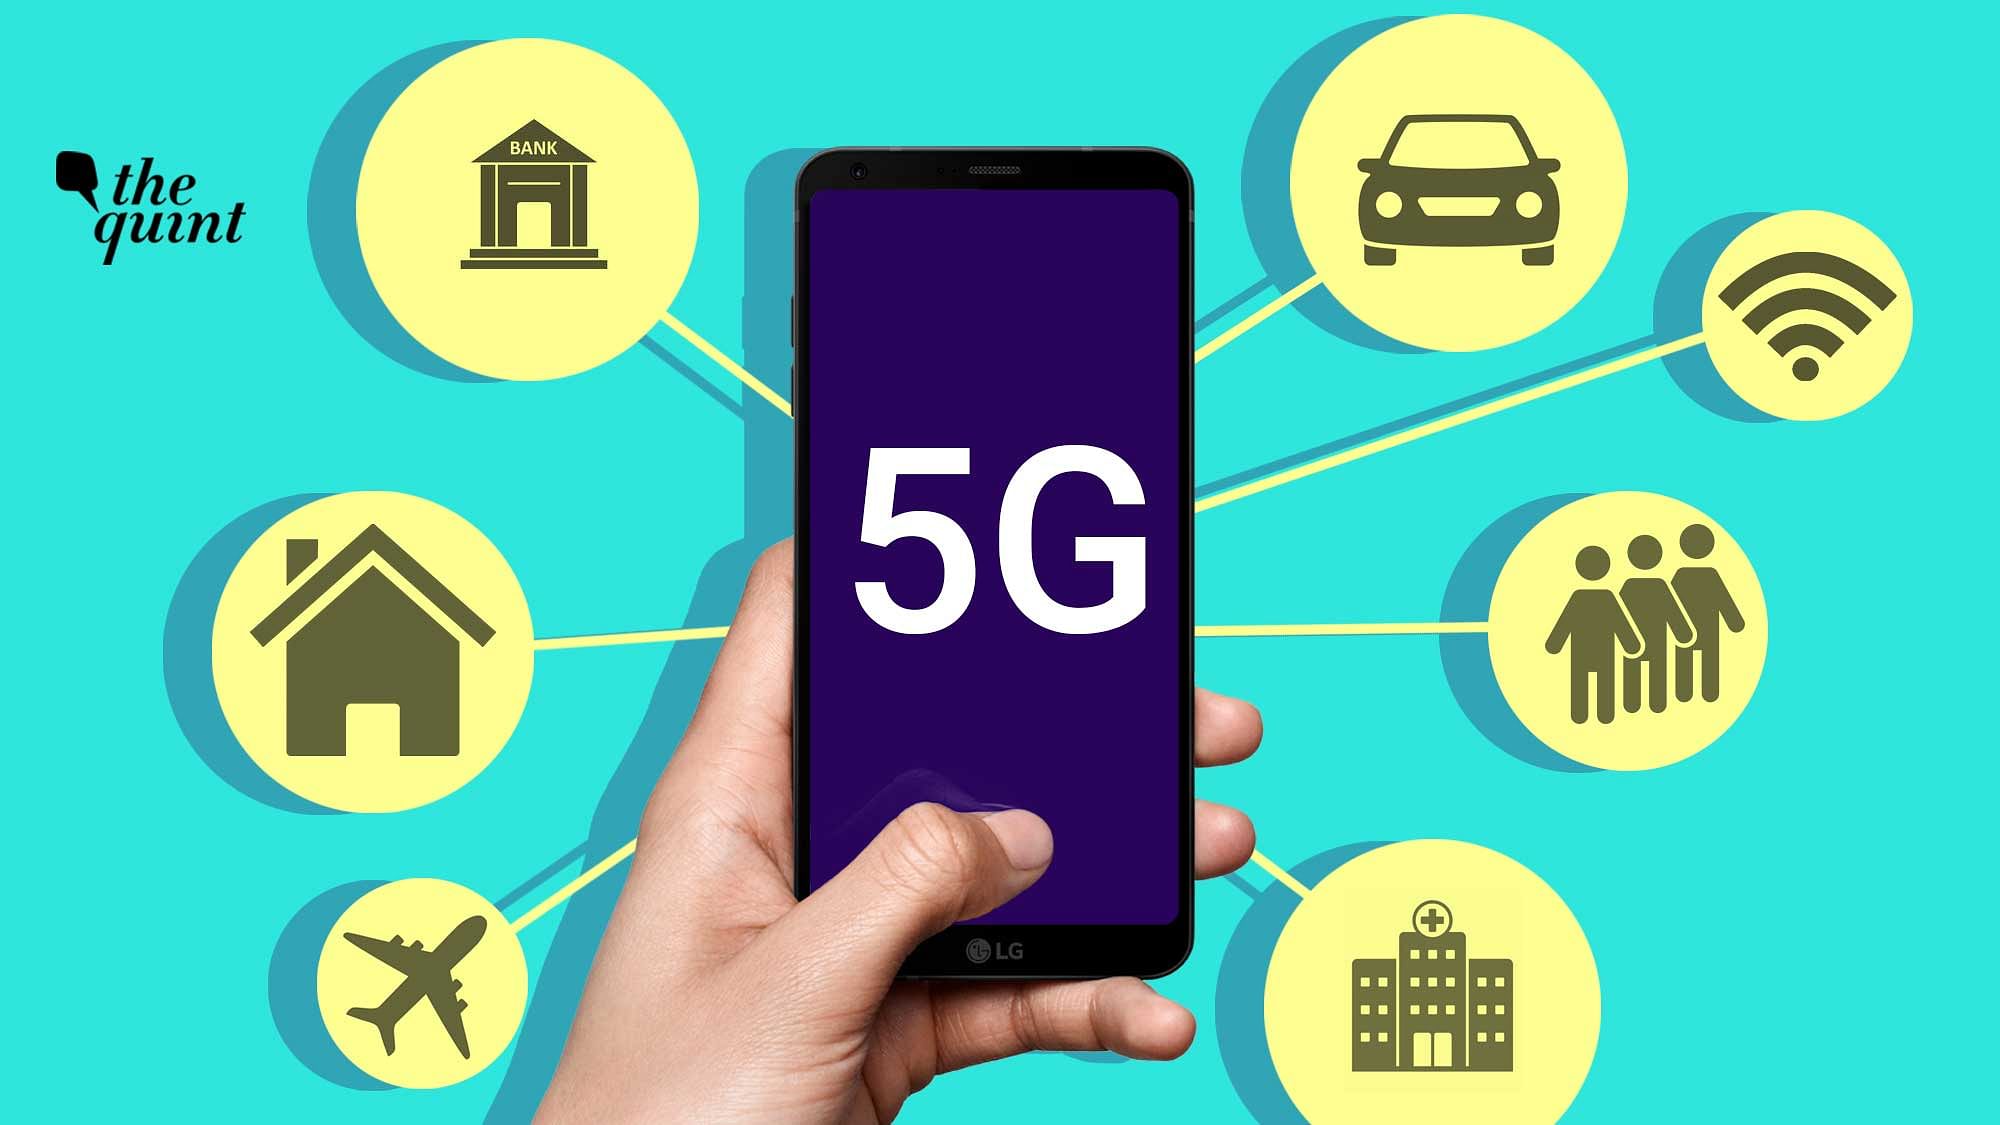  5G technology is known to be 20 times faster than 4G service 